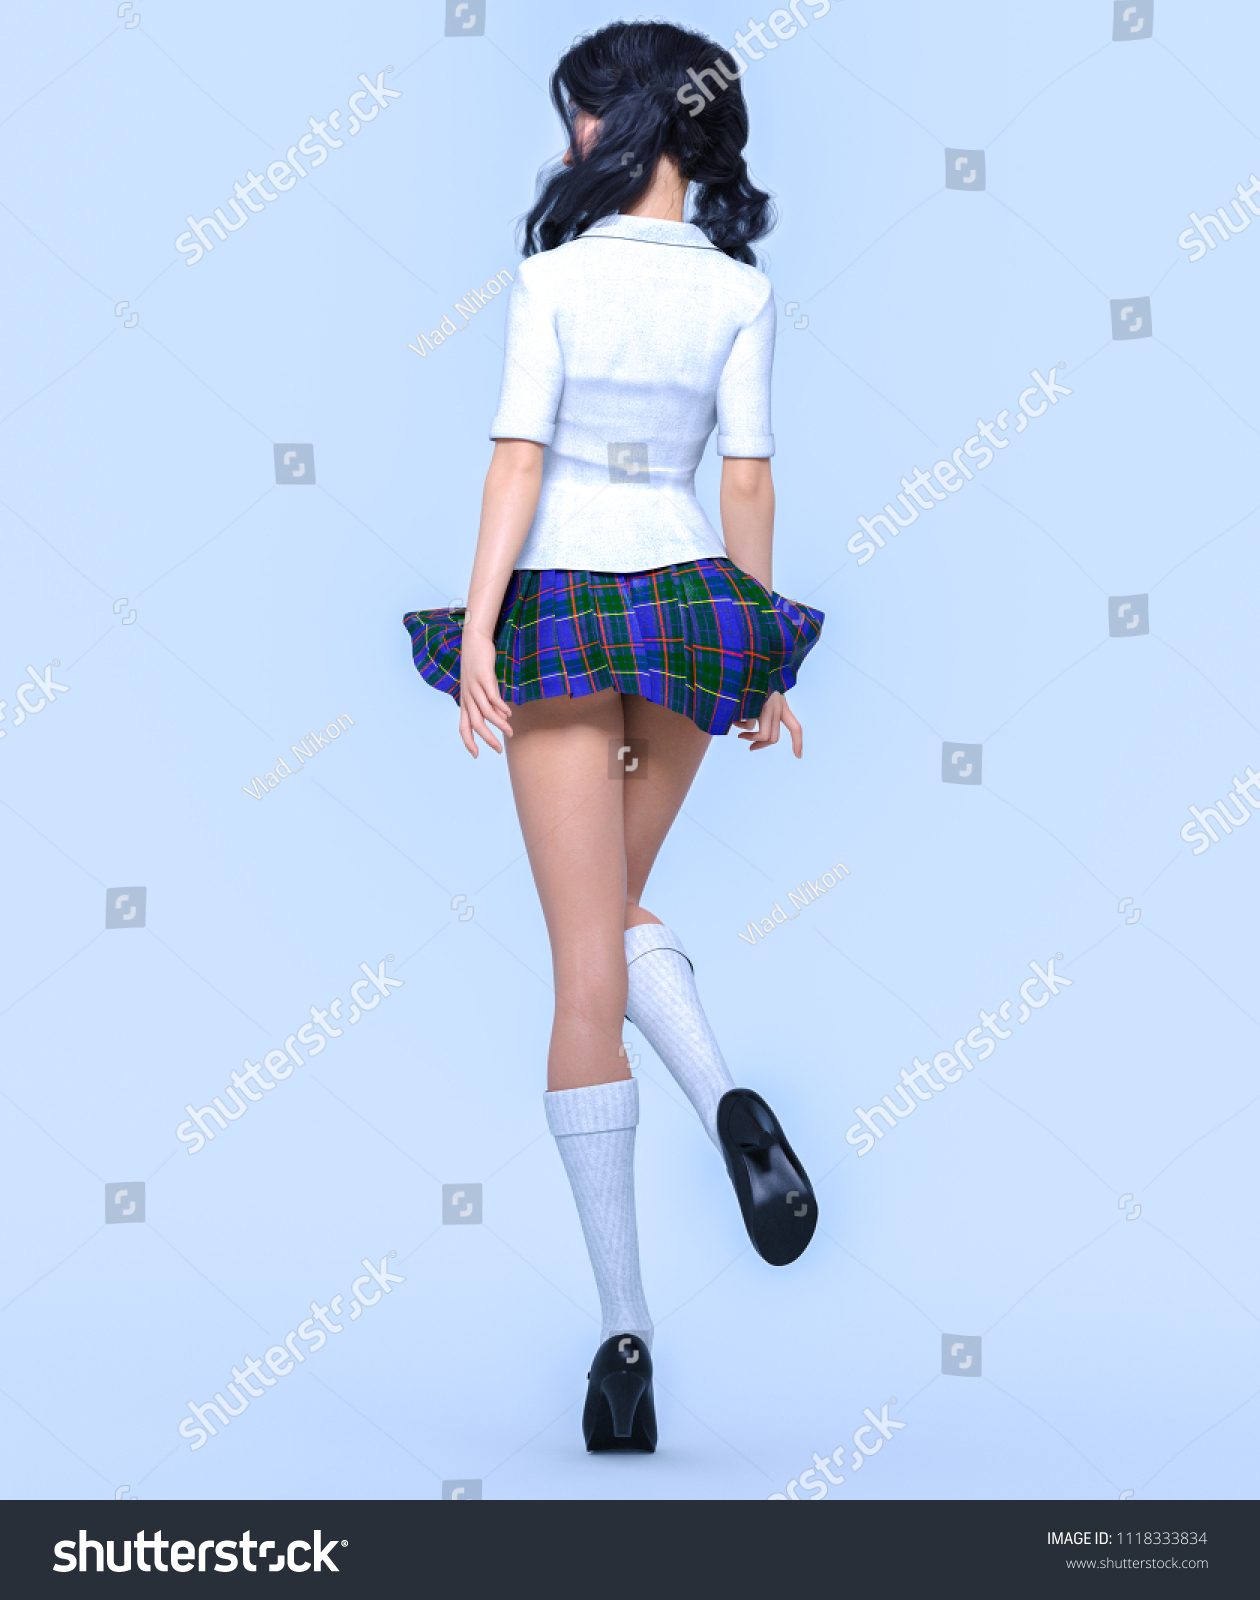 charlene shahid recommends up skirt at school pic